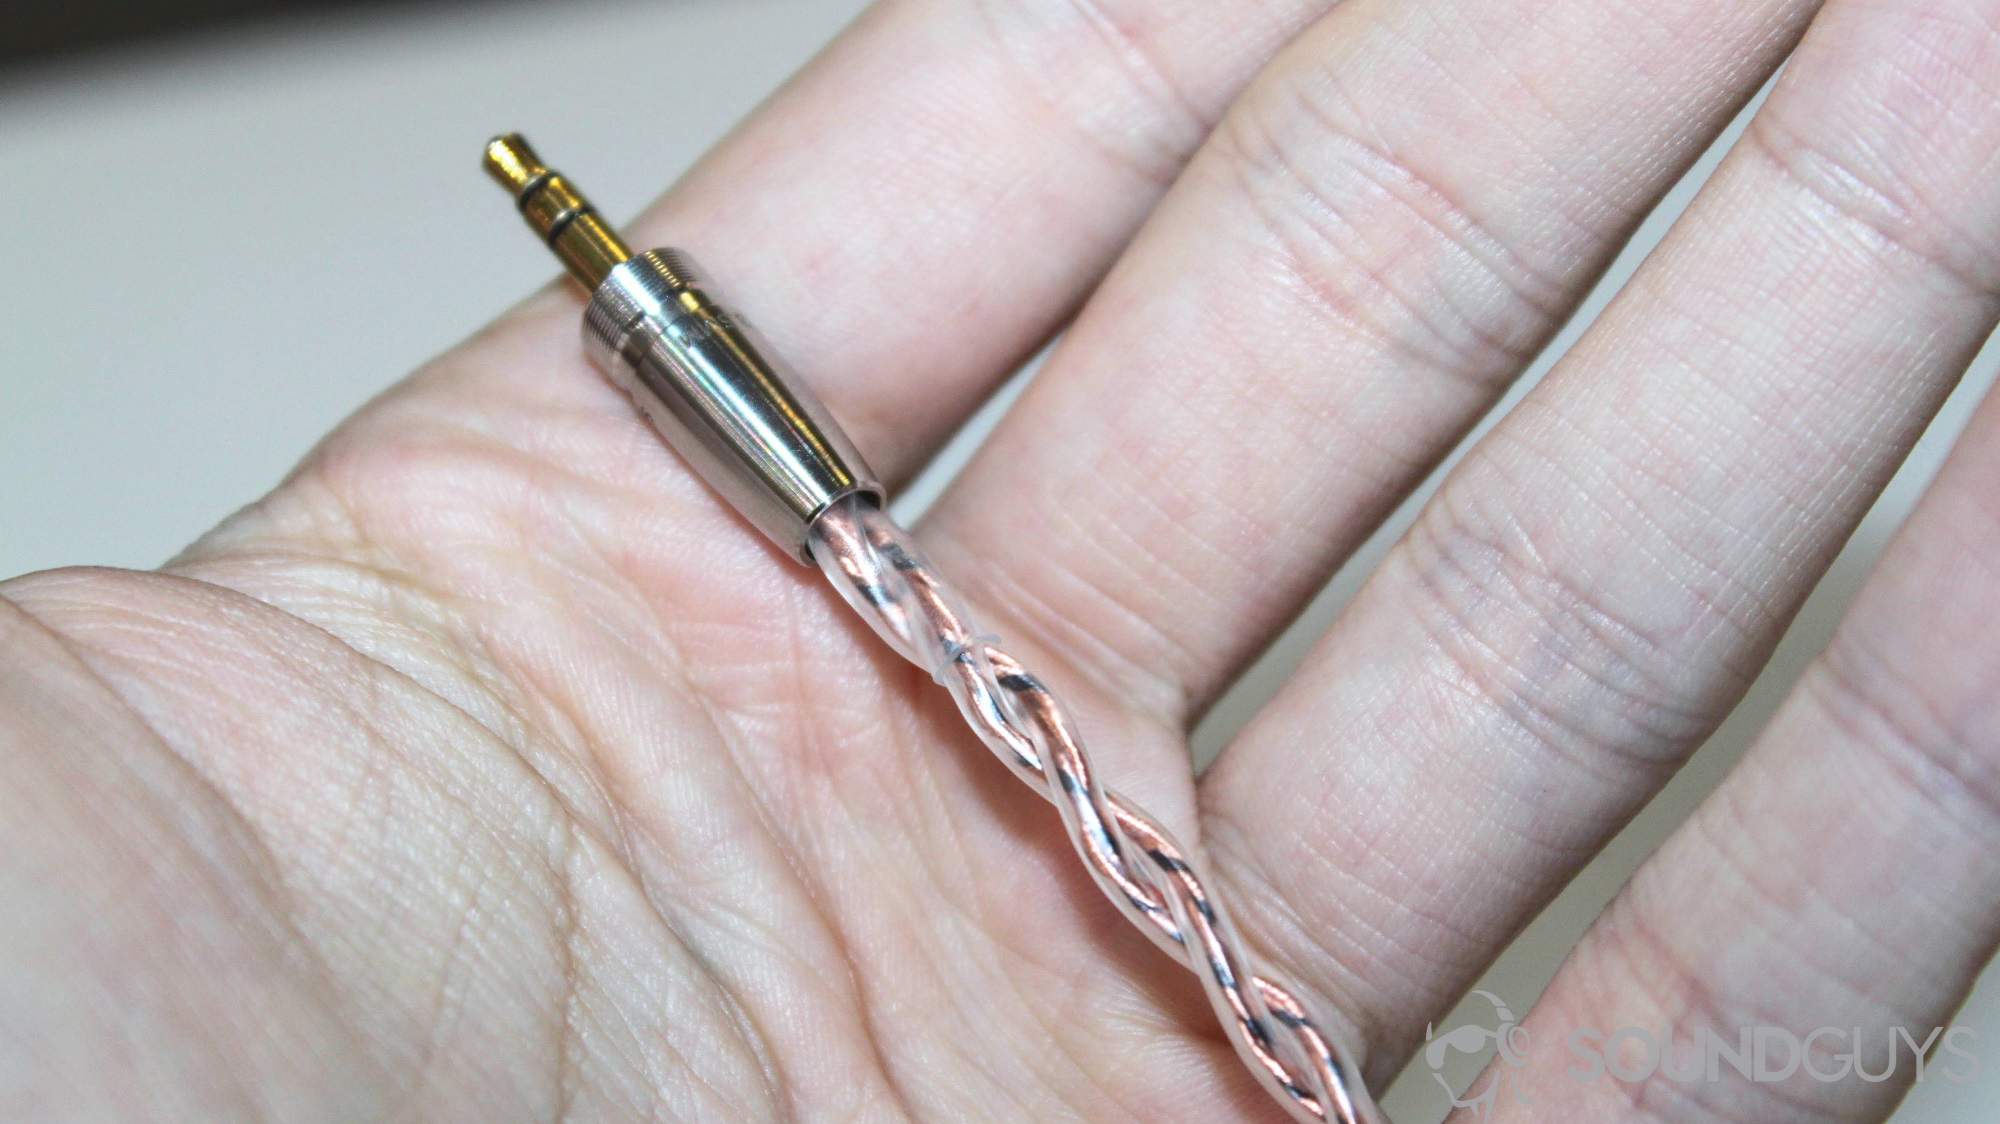 The RHA CL2 Planar cable and jack.